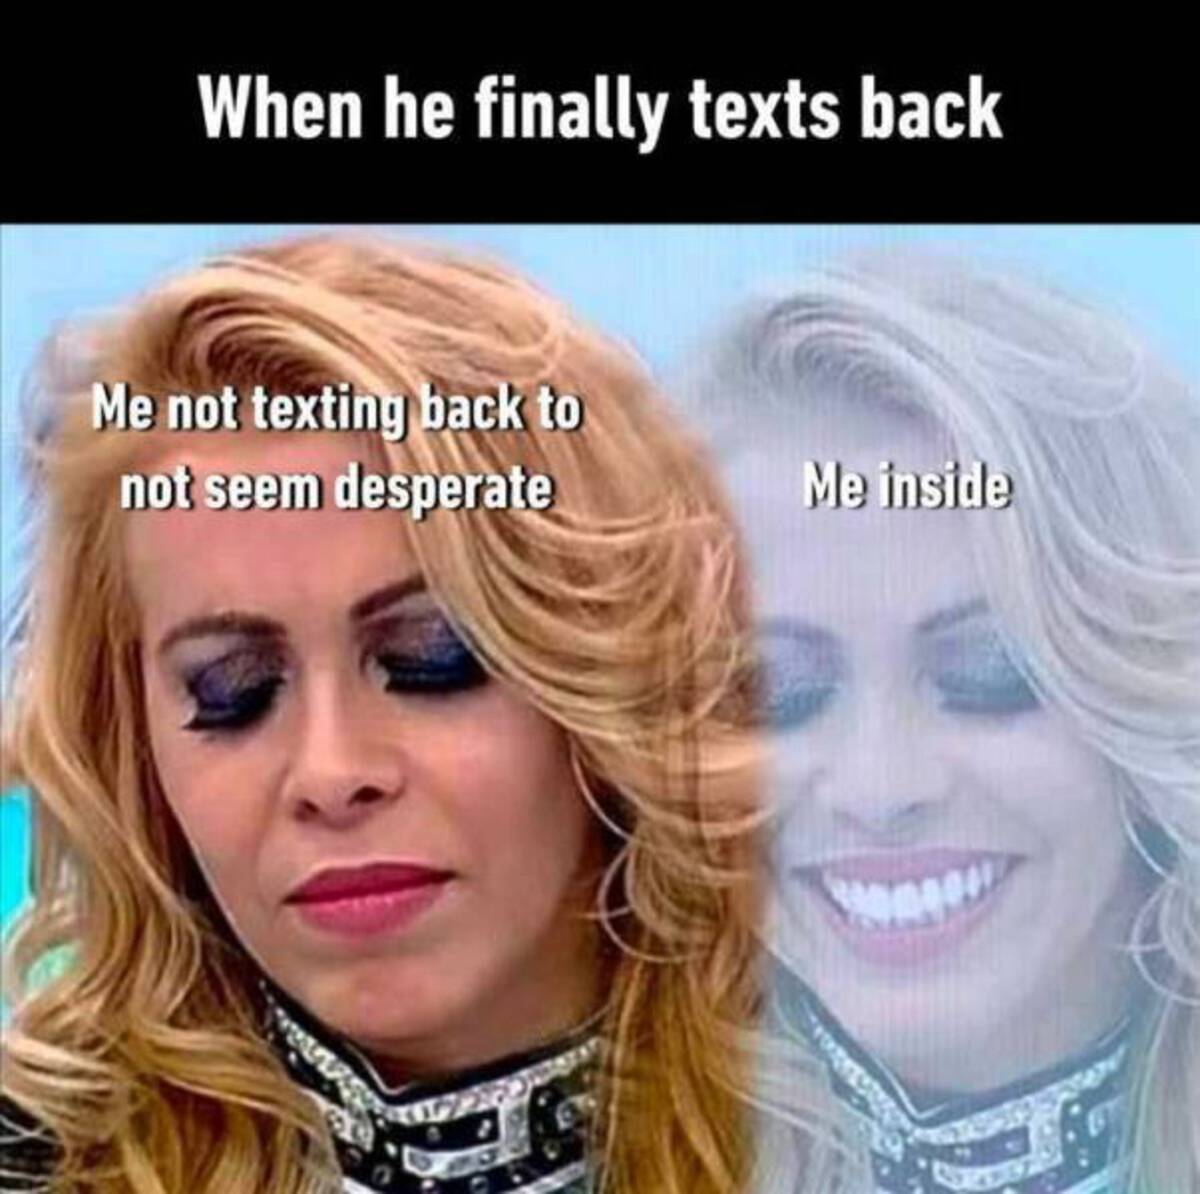 blond - When he finally texts back Me not texting back to not seem desperate Me inside